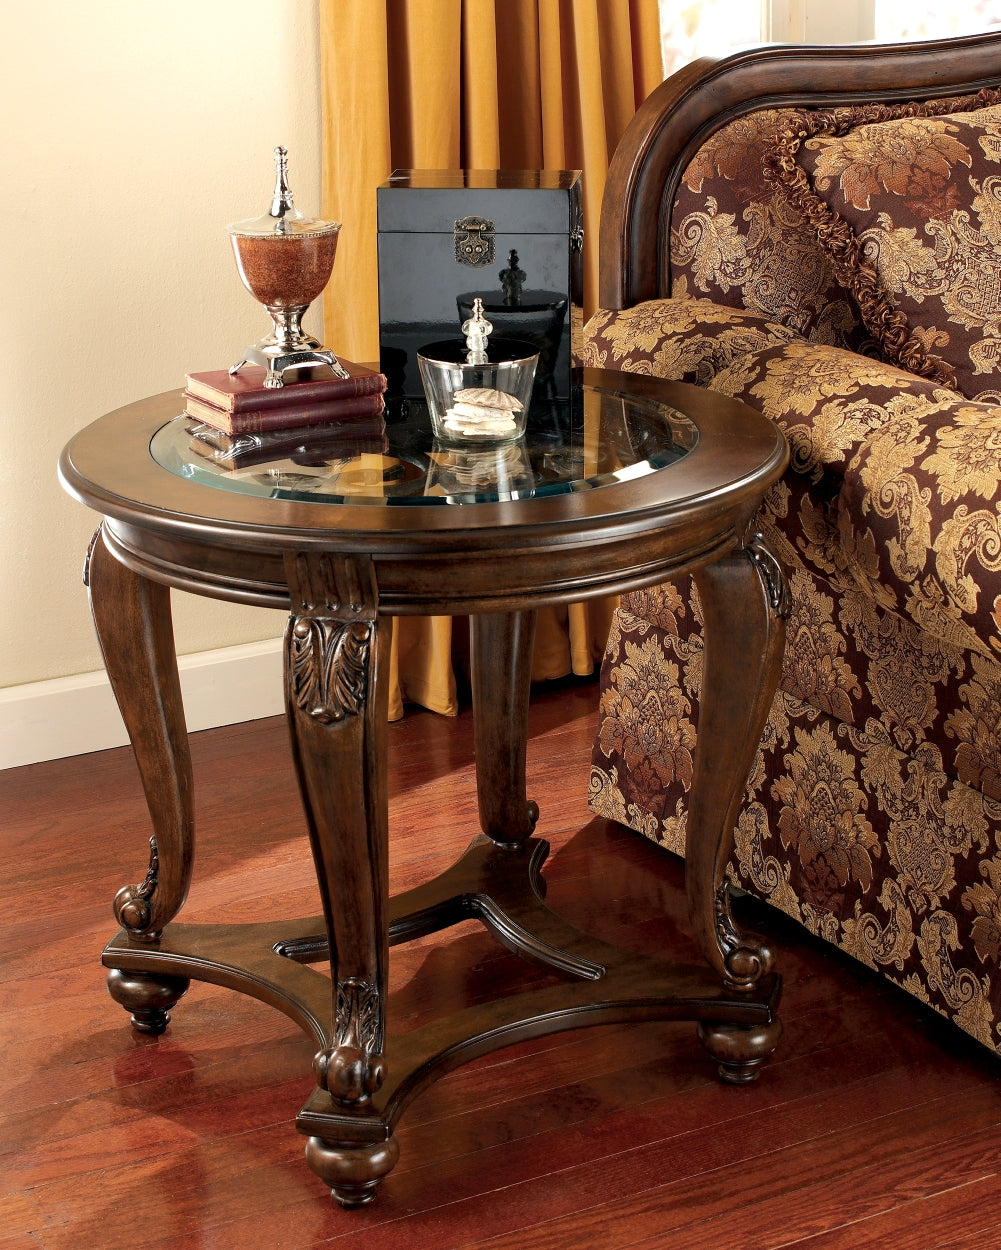 Norcastle Coffee Table with 1 End Table Wilson Furniture (OH)  in Bridgeport, Ohio. Serving Bridgeport, Yorkville, Bellaire, & Avondale